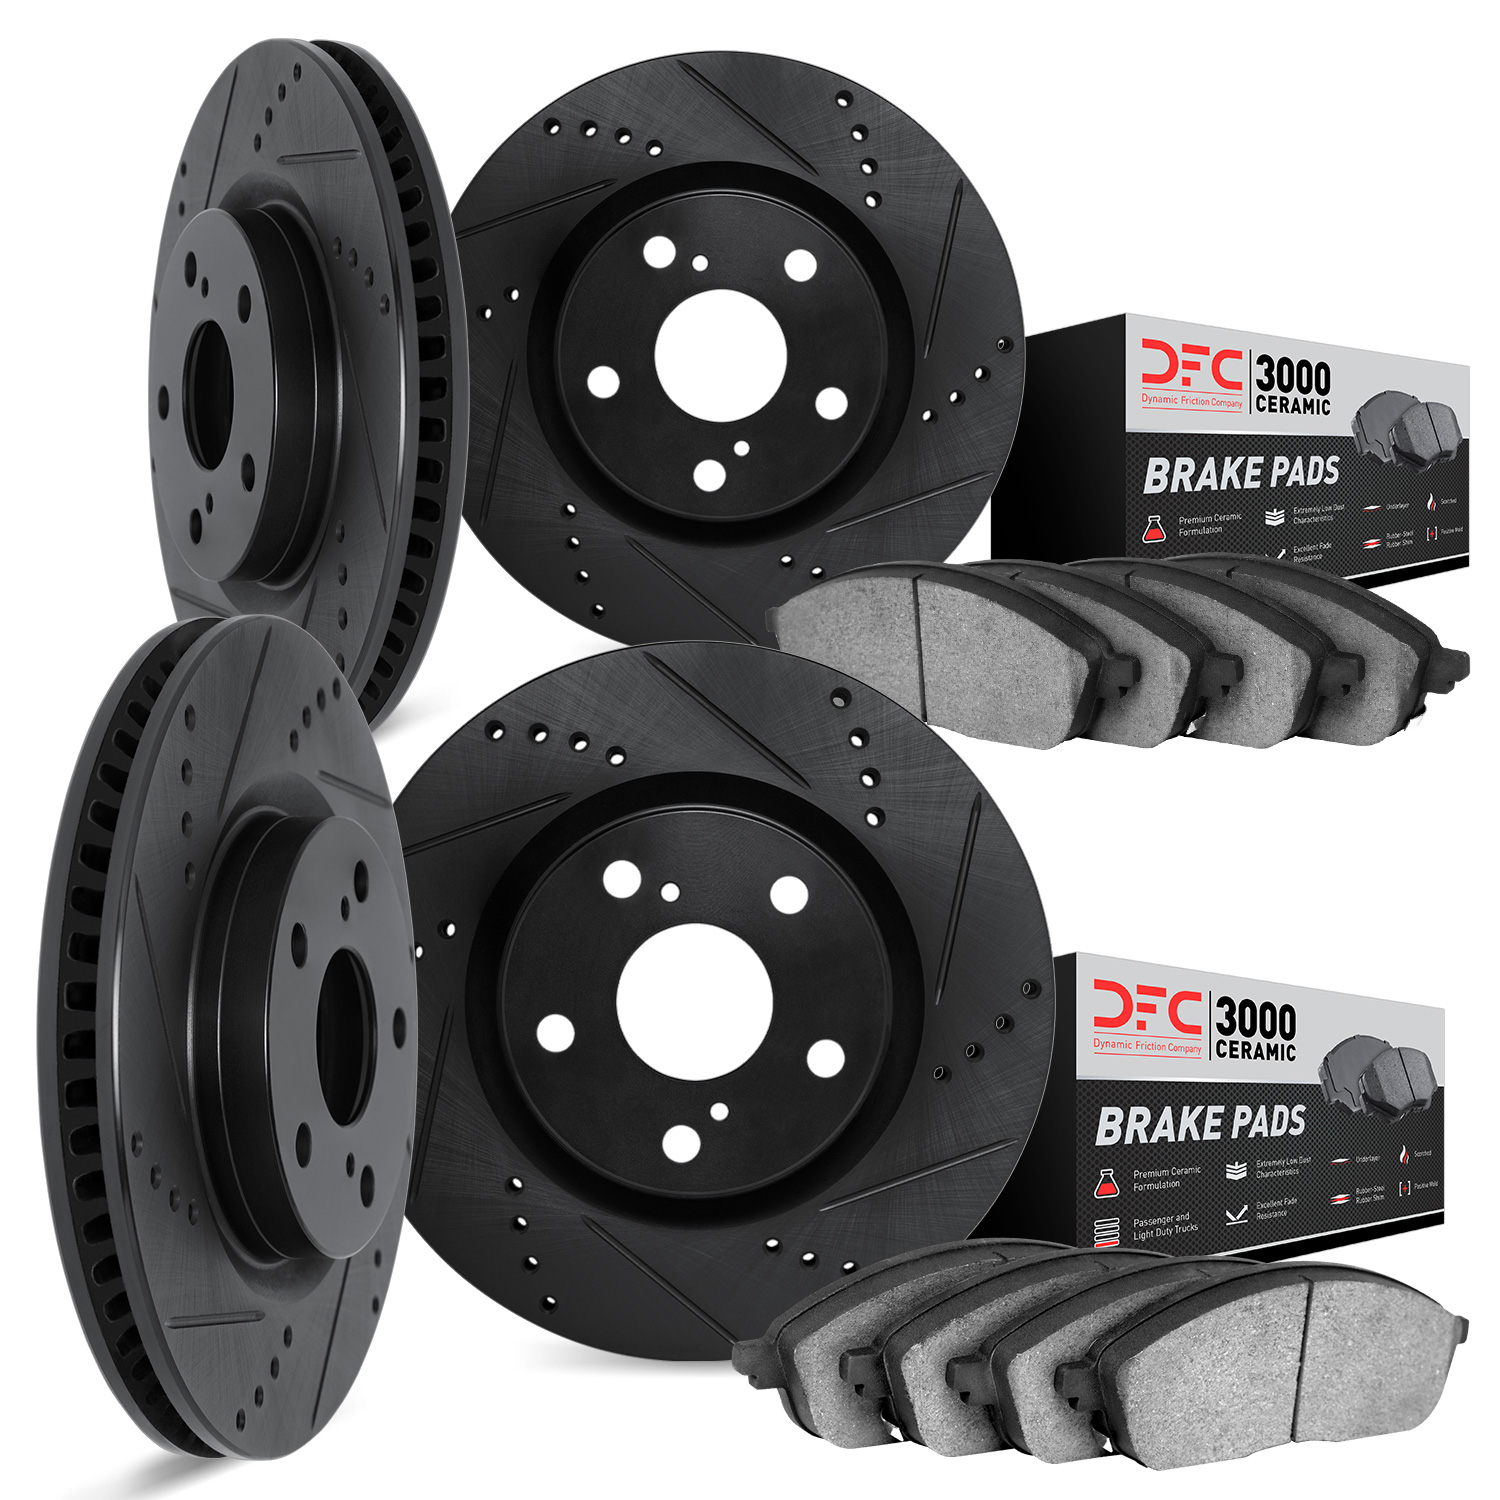 8304-68010 Drilled/Slotted Brake Rotors with 3000-Series Ceramic Brake Pads Kit [Black], Fits Select Infiniti/Nissan, Position: